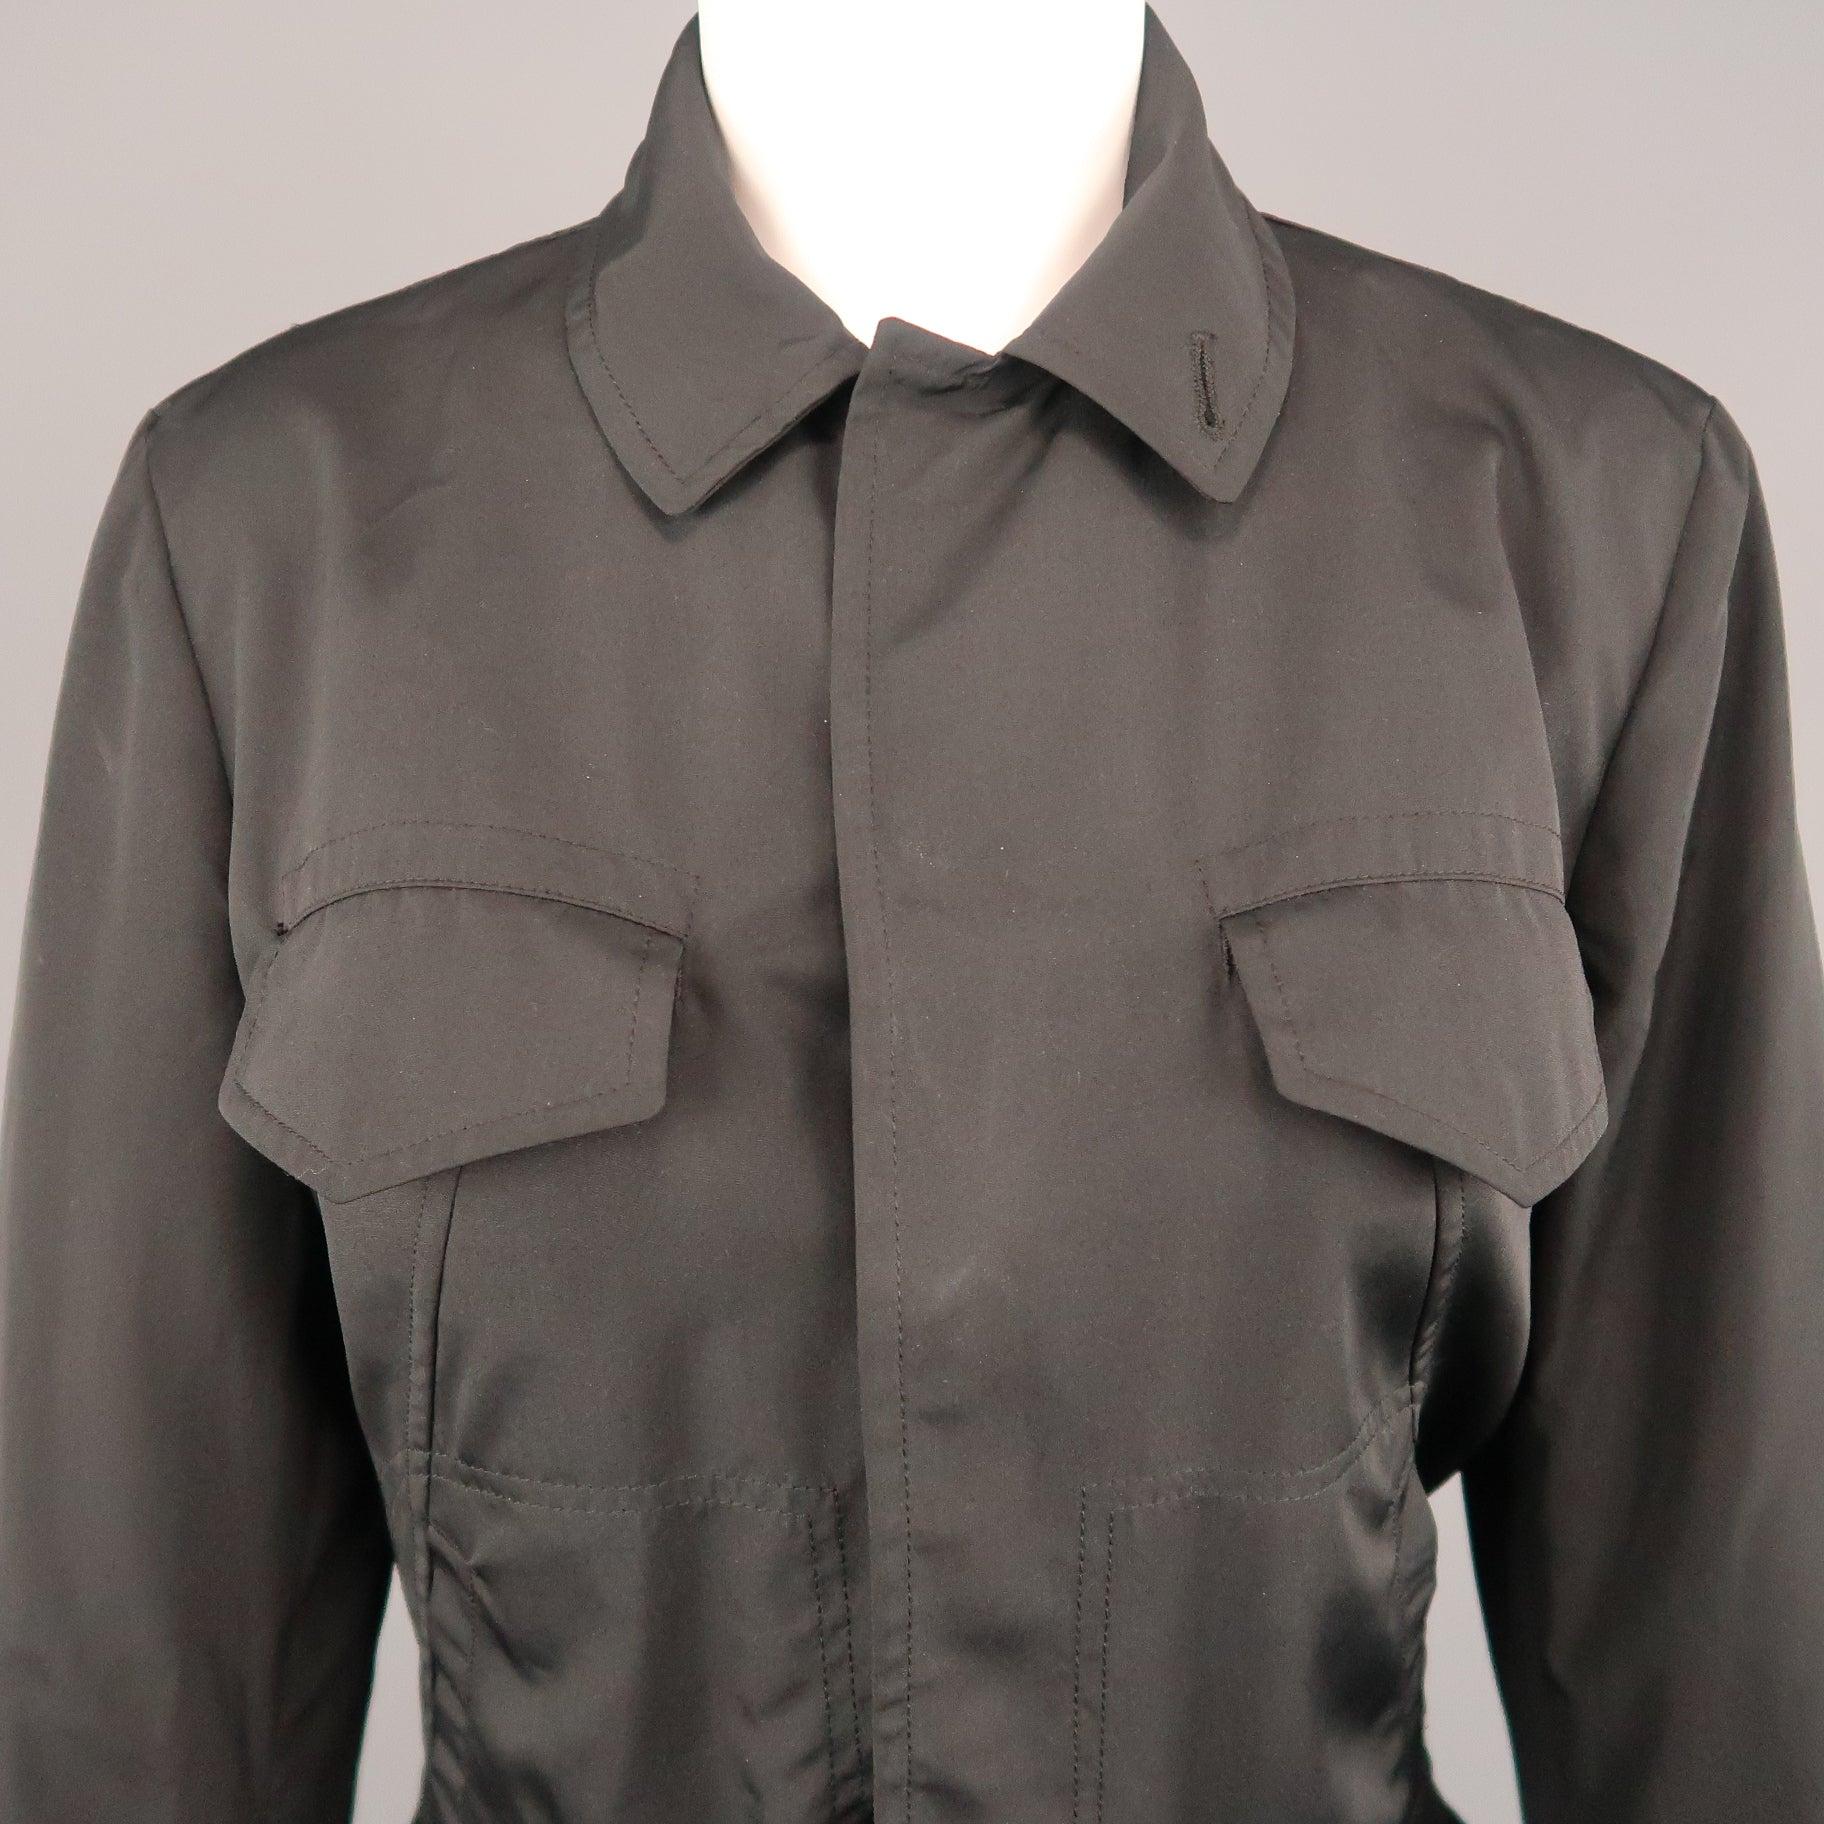 Vintage JEAN PAUL GAULTIER trucker style jacket comes in black fabric with a pointed collar, hidden placket snap closure, flap and slit pockets, and detachable brown leather belt waistband. Made in Italy.Excellent Pre-Owned Condition. 

Marked:   8